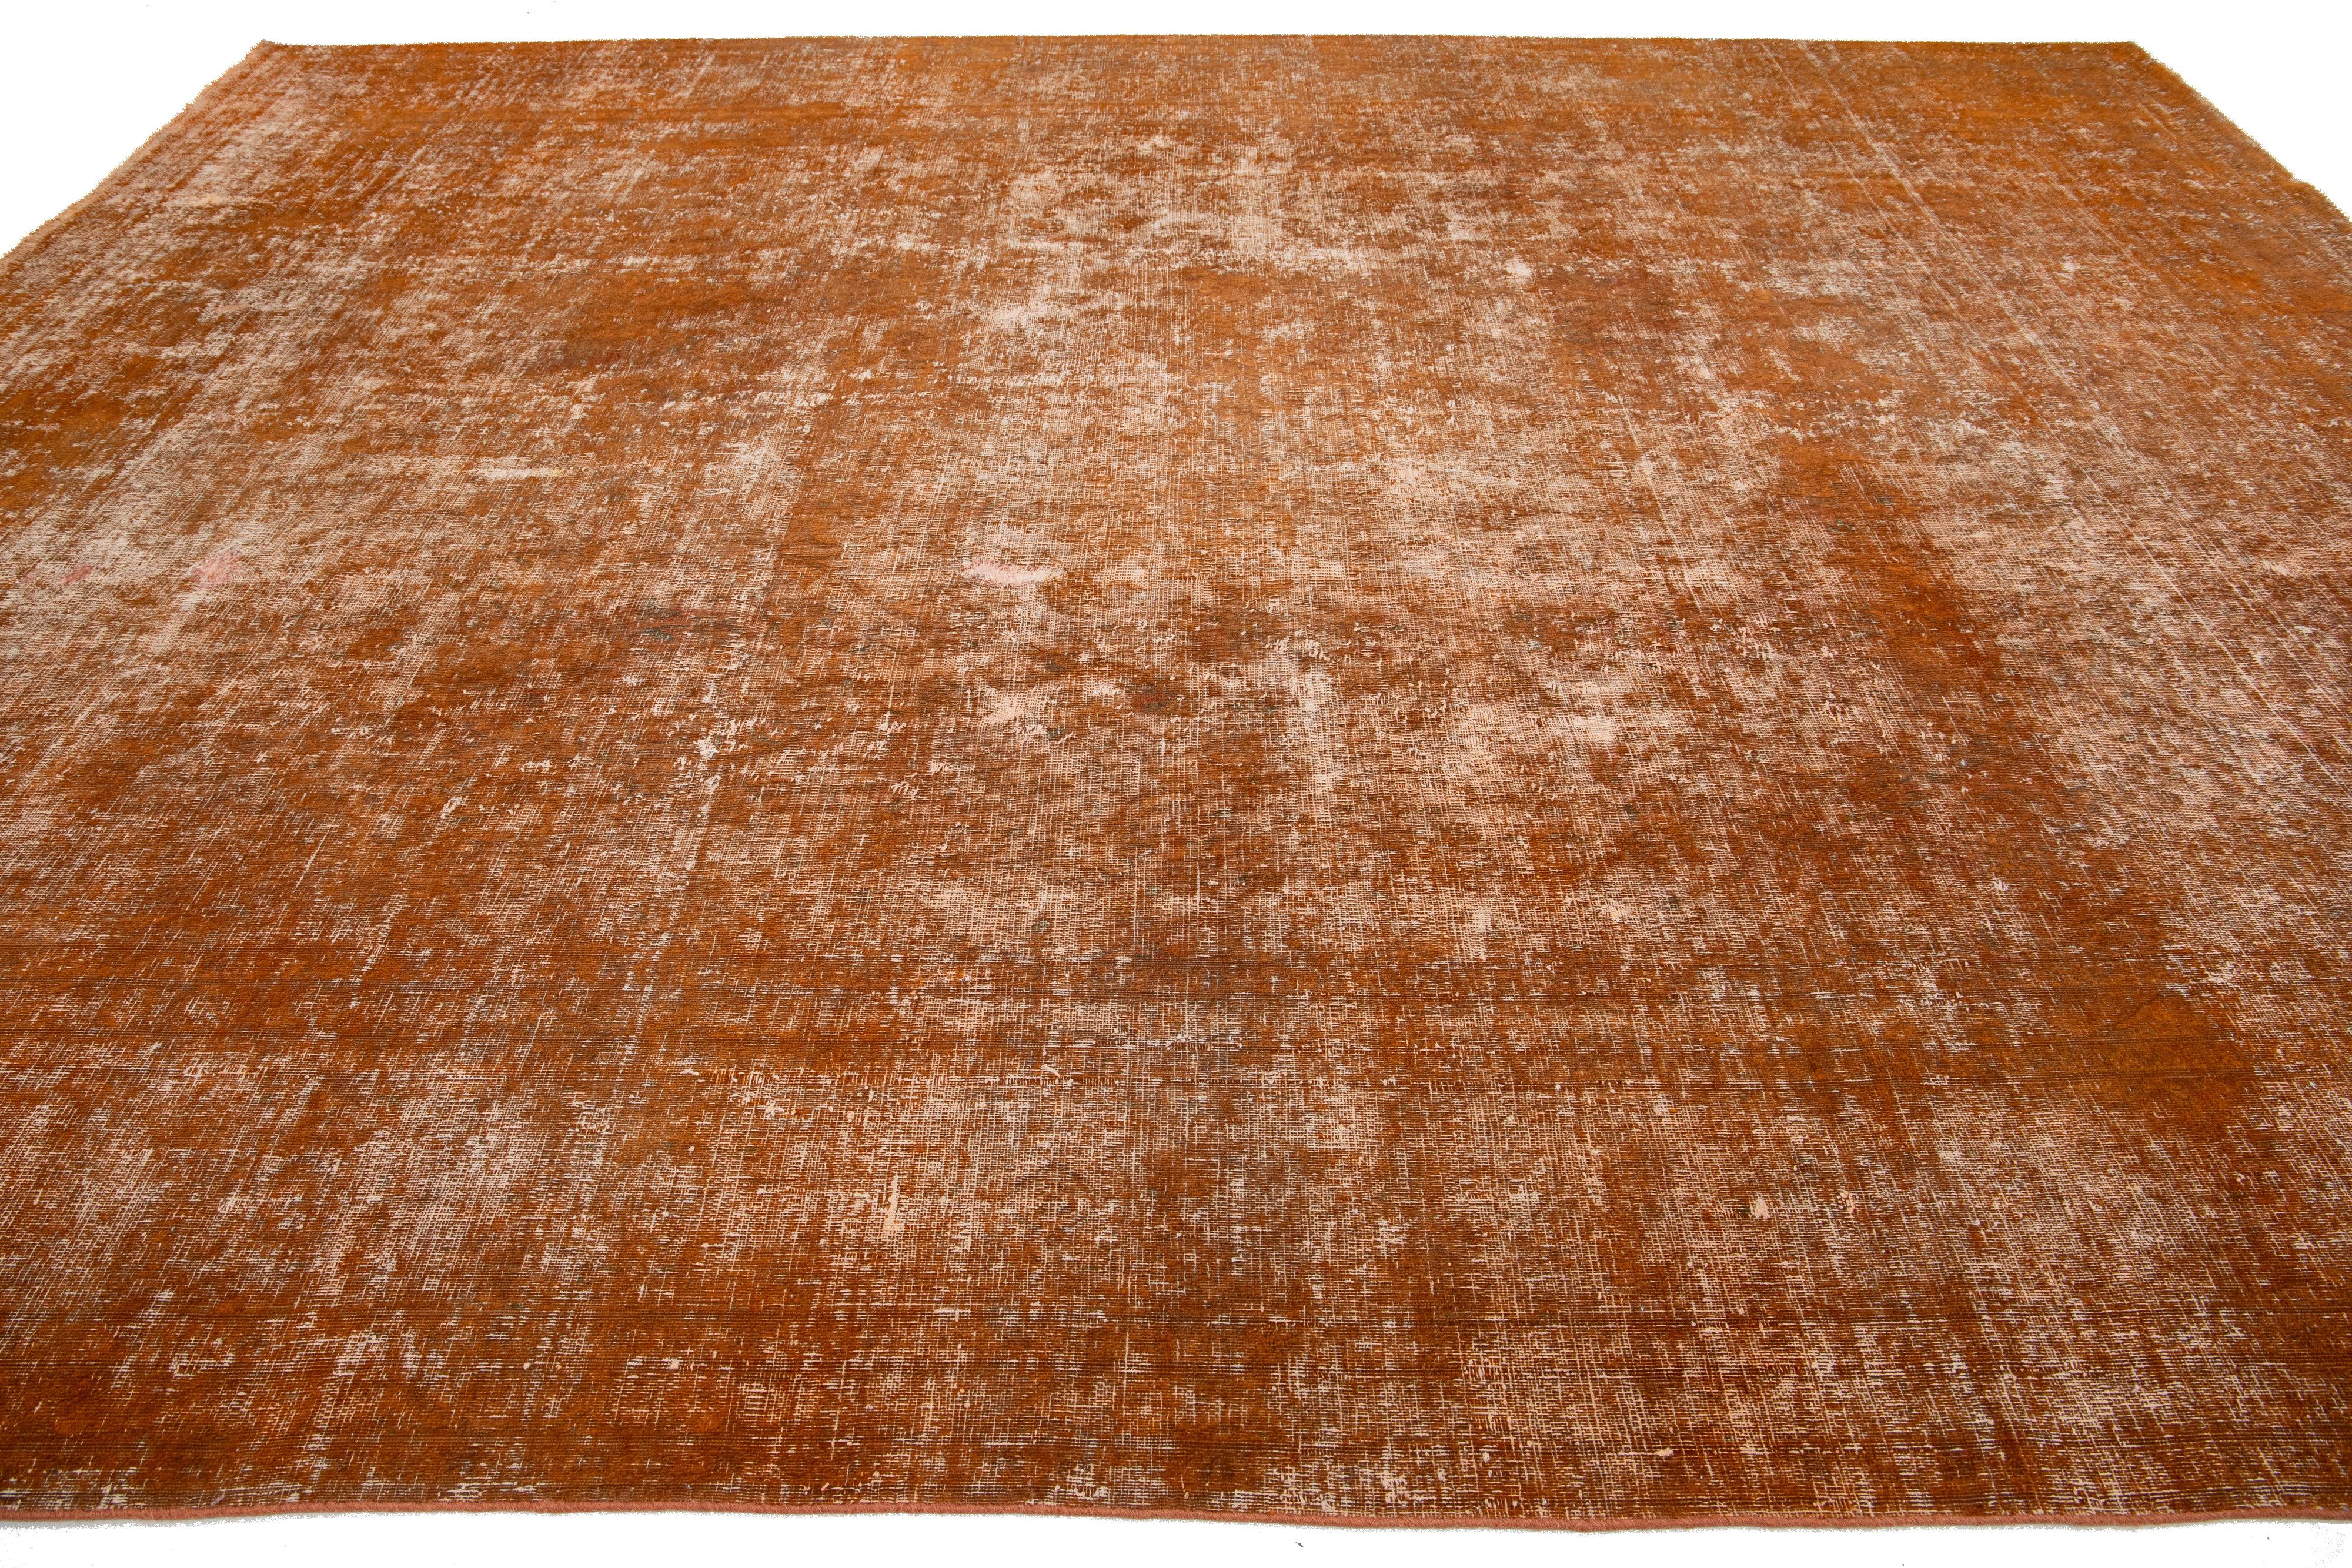  Antique Room size Orange Wool Rug Persian Overdyed With Allover Pattern For Sale 1